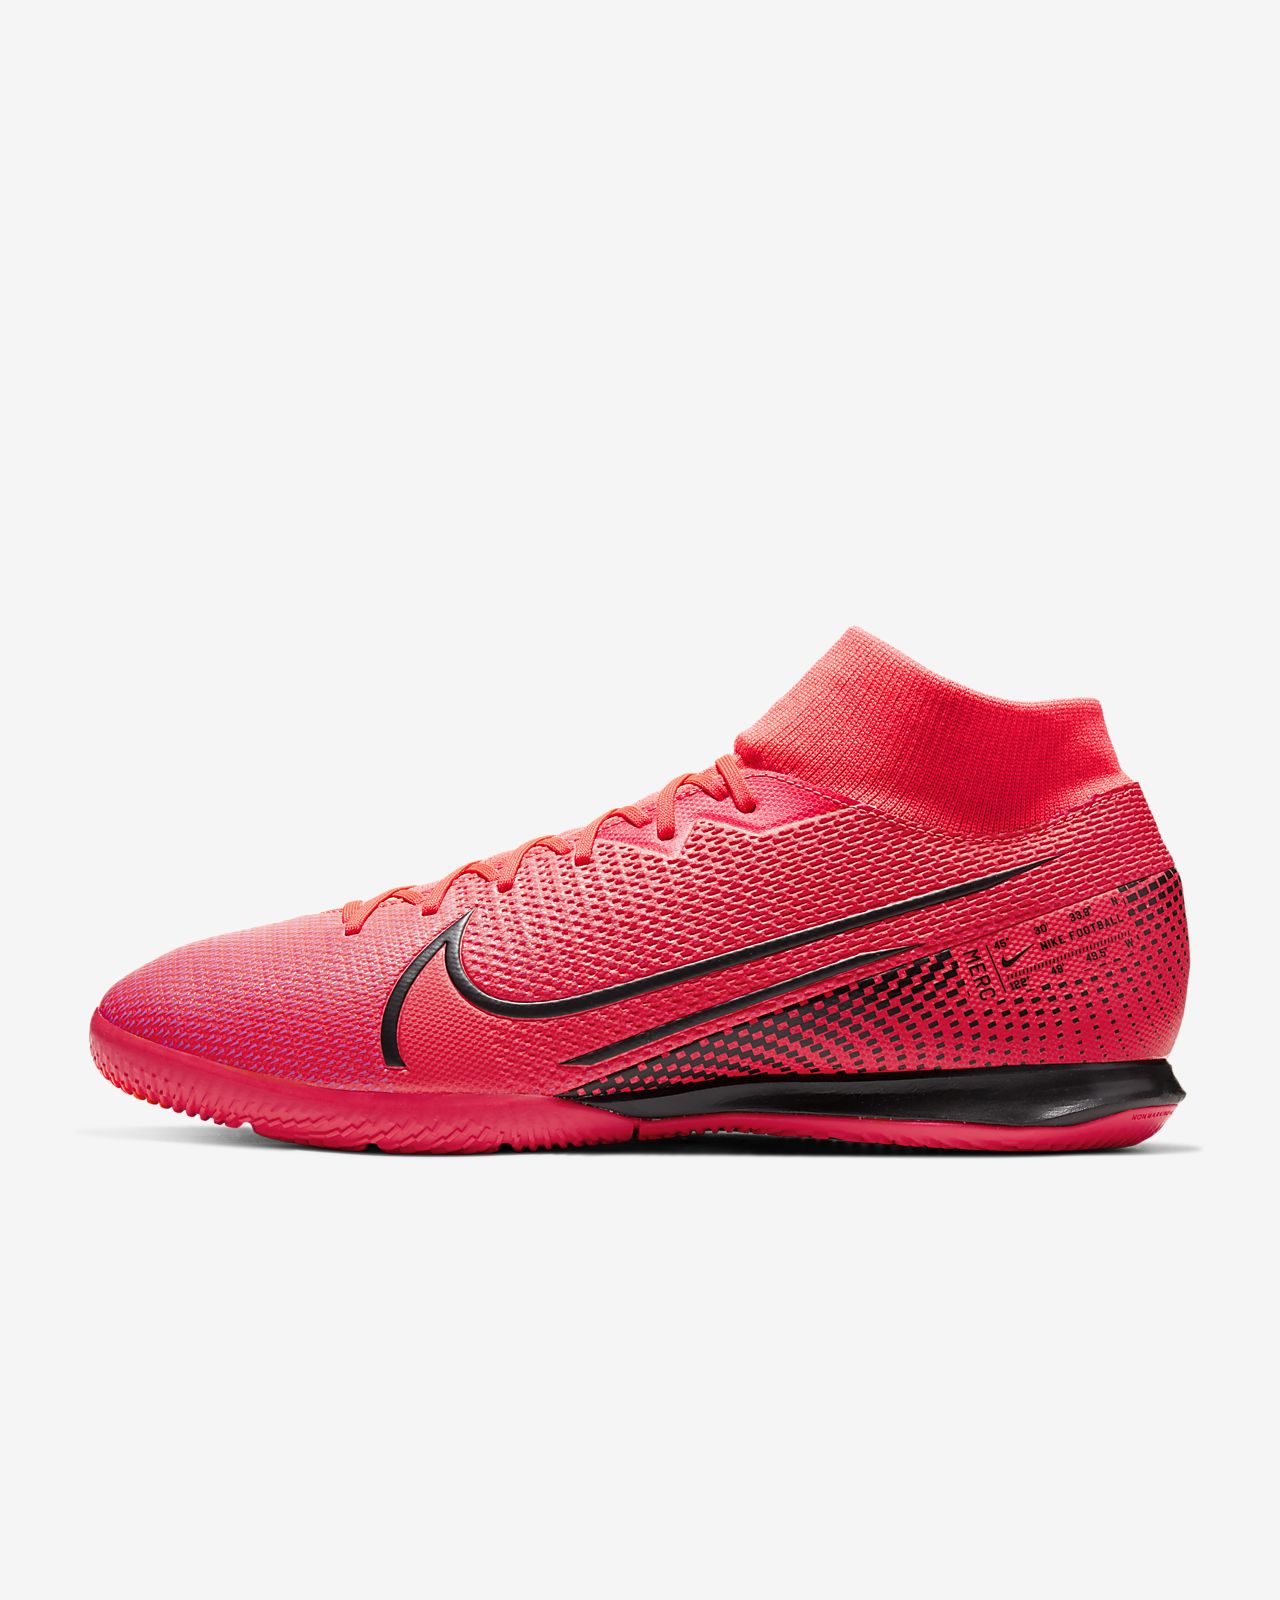 Buy Nike Mercurial Superfly 7 Elite Mds Firm Ground Only.